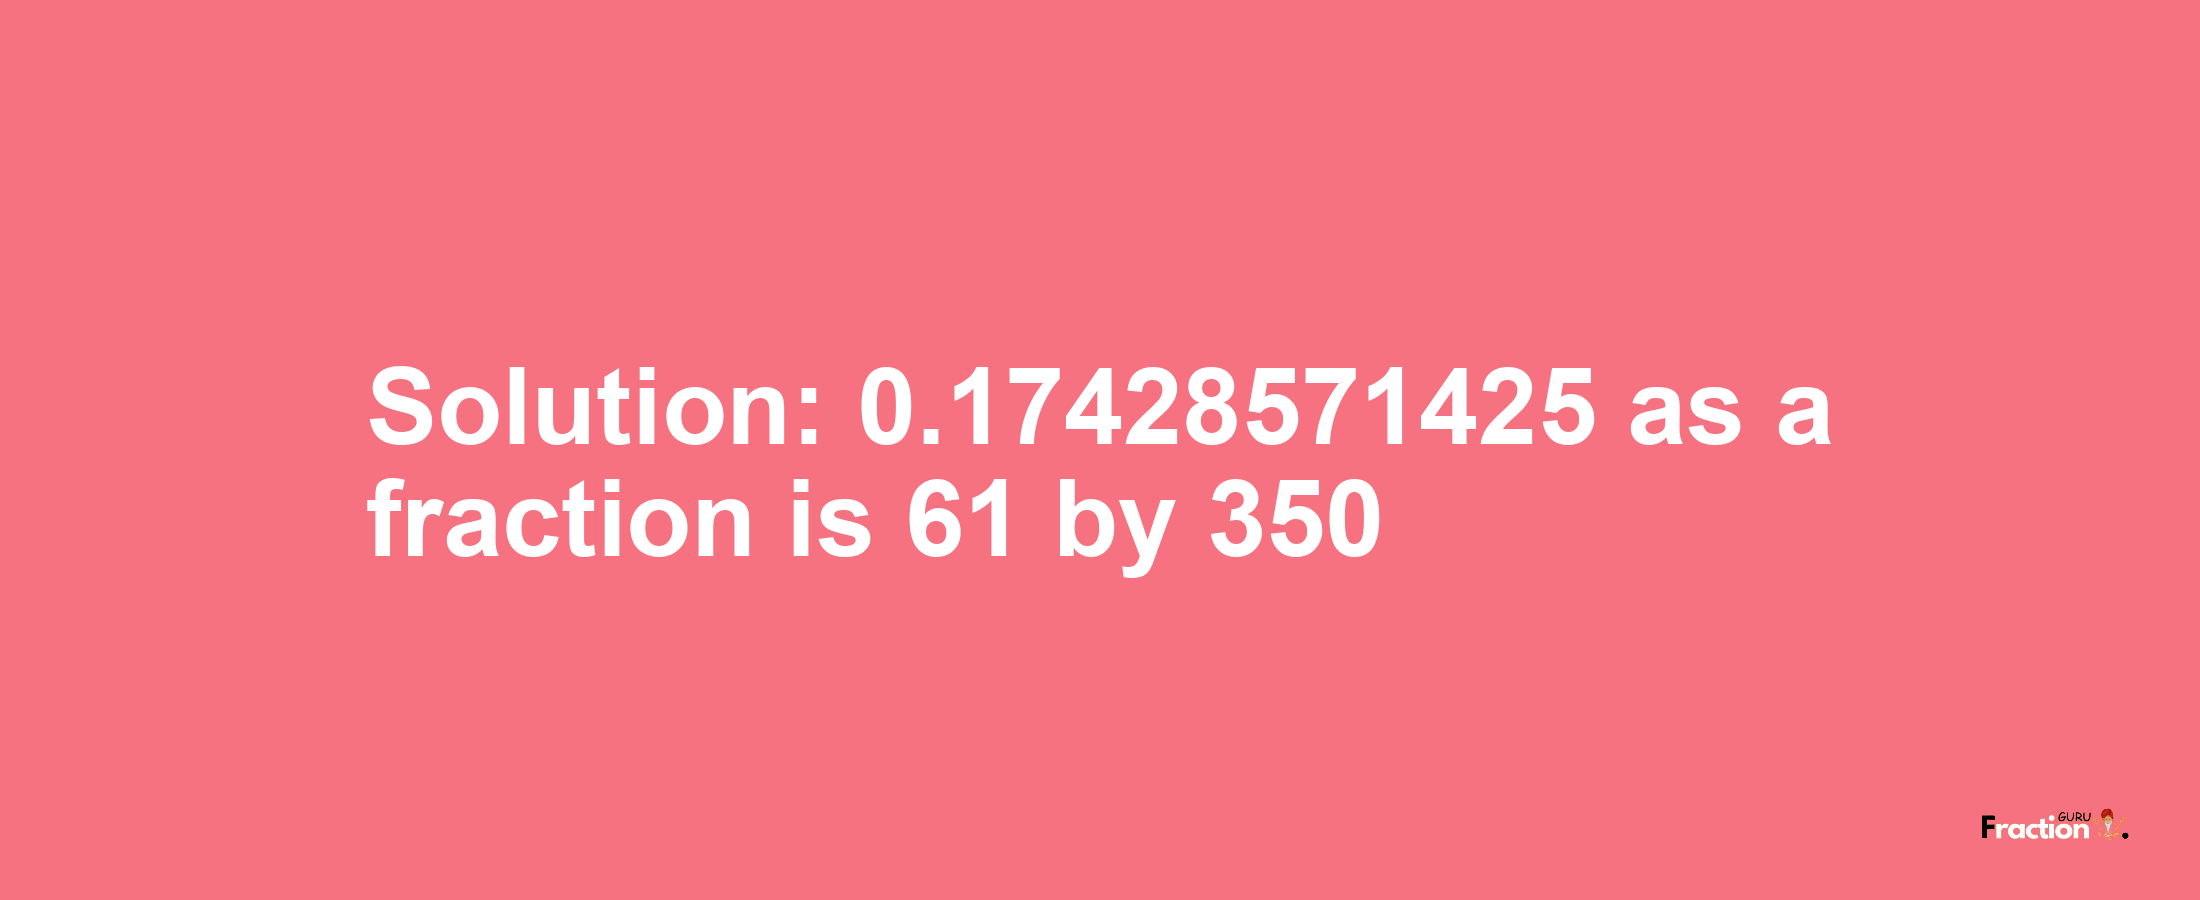 Solution:0.17428571425 as a fraction is 61/350